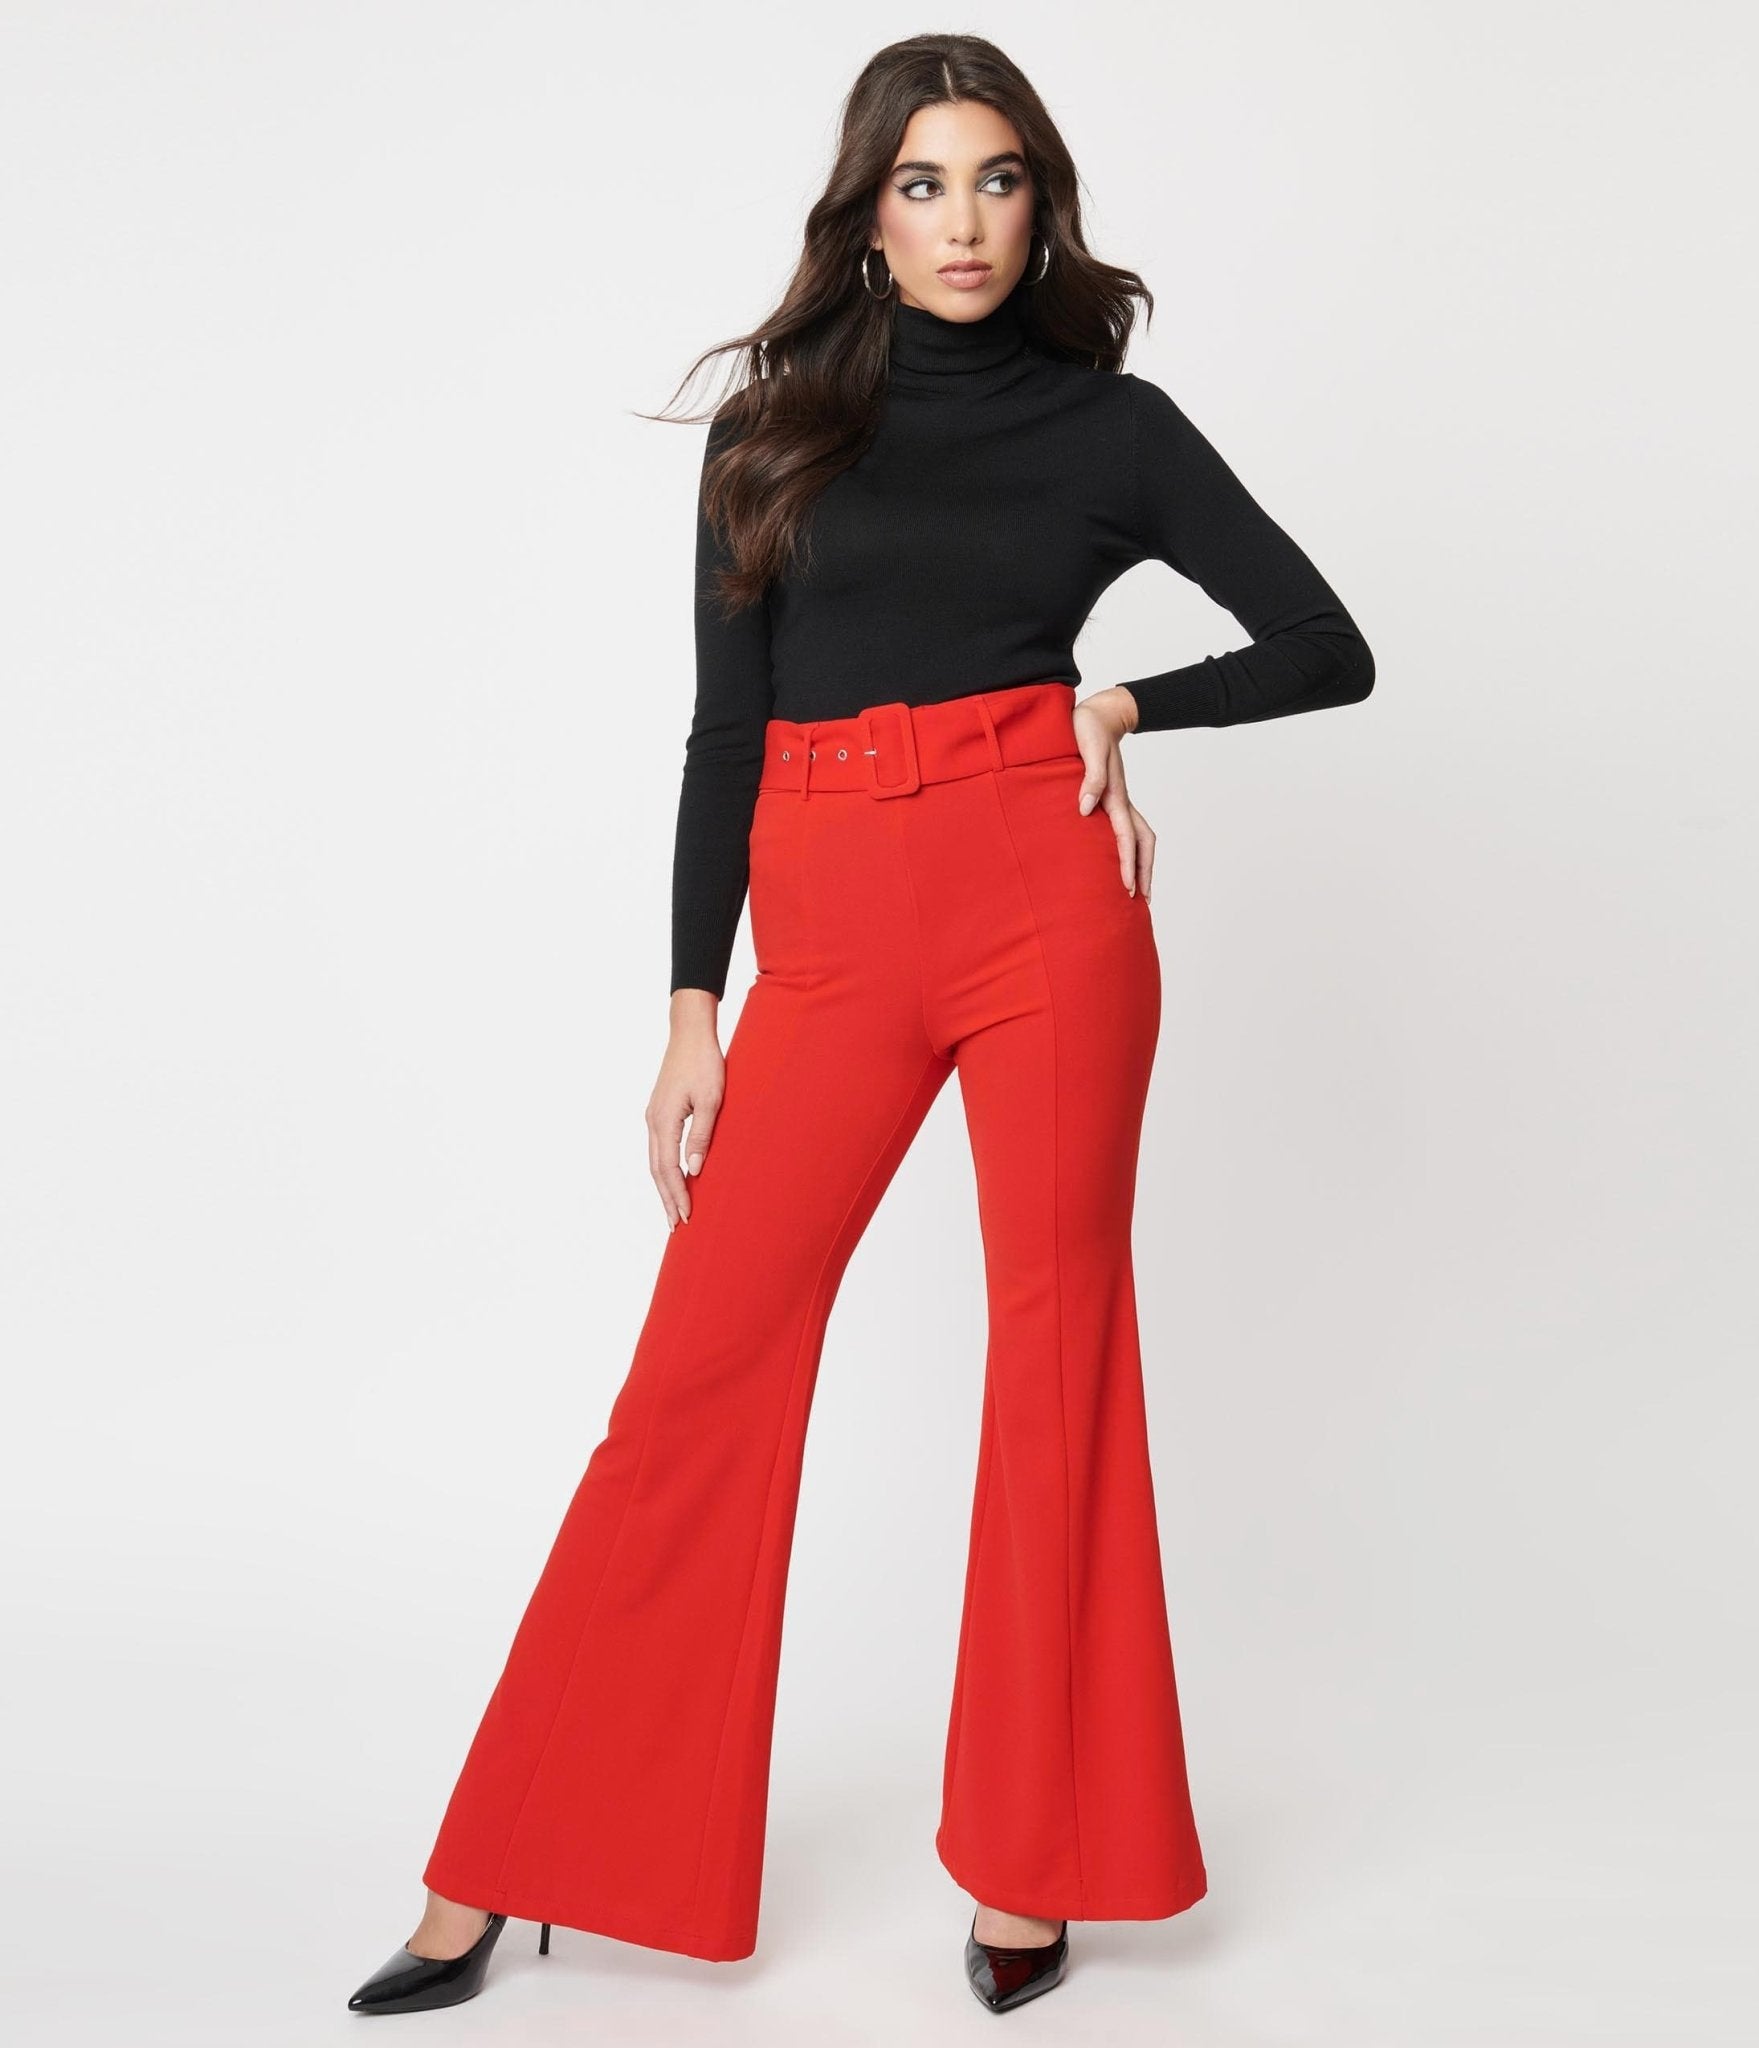 Retro 60s Flare Bell Bottom High Waist Red and Black Leopard Cotton Print  Pants